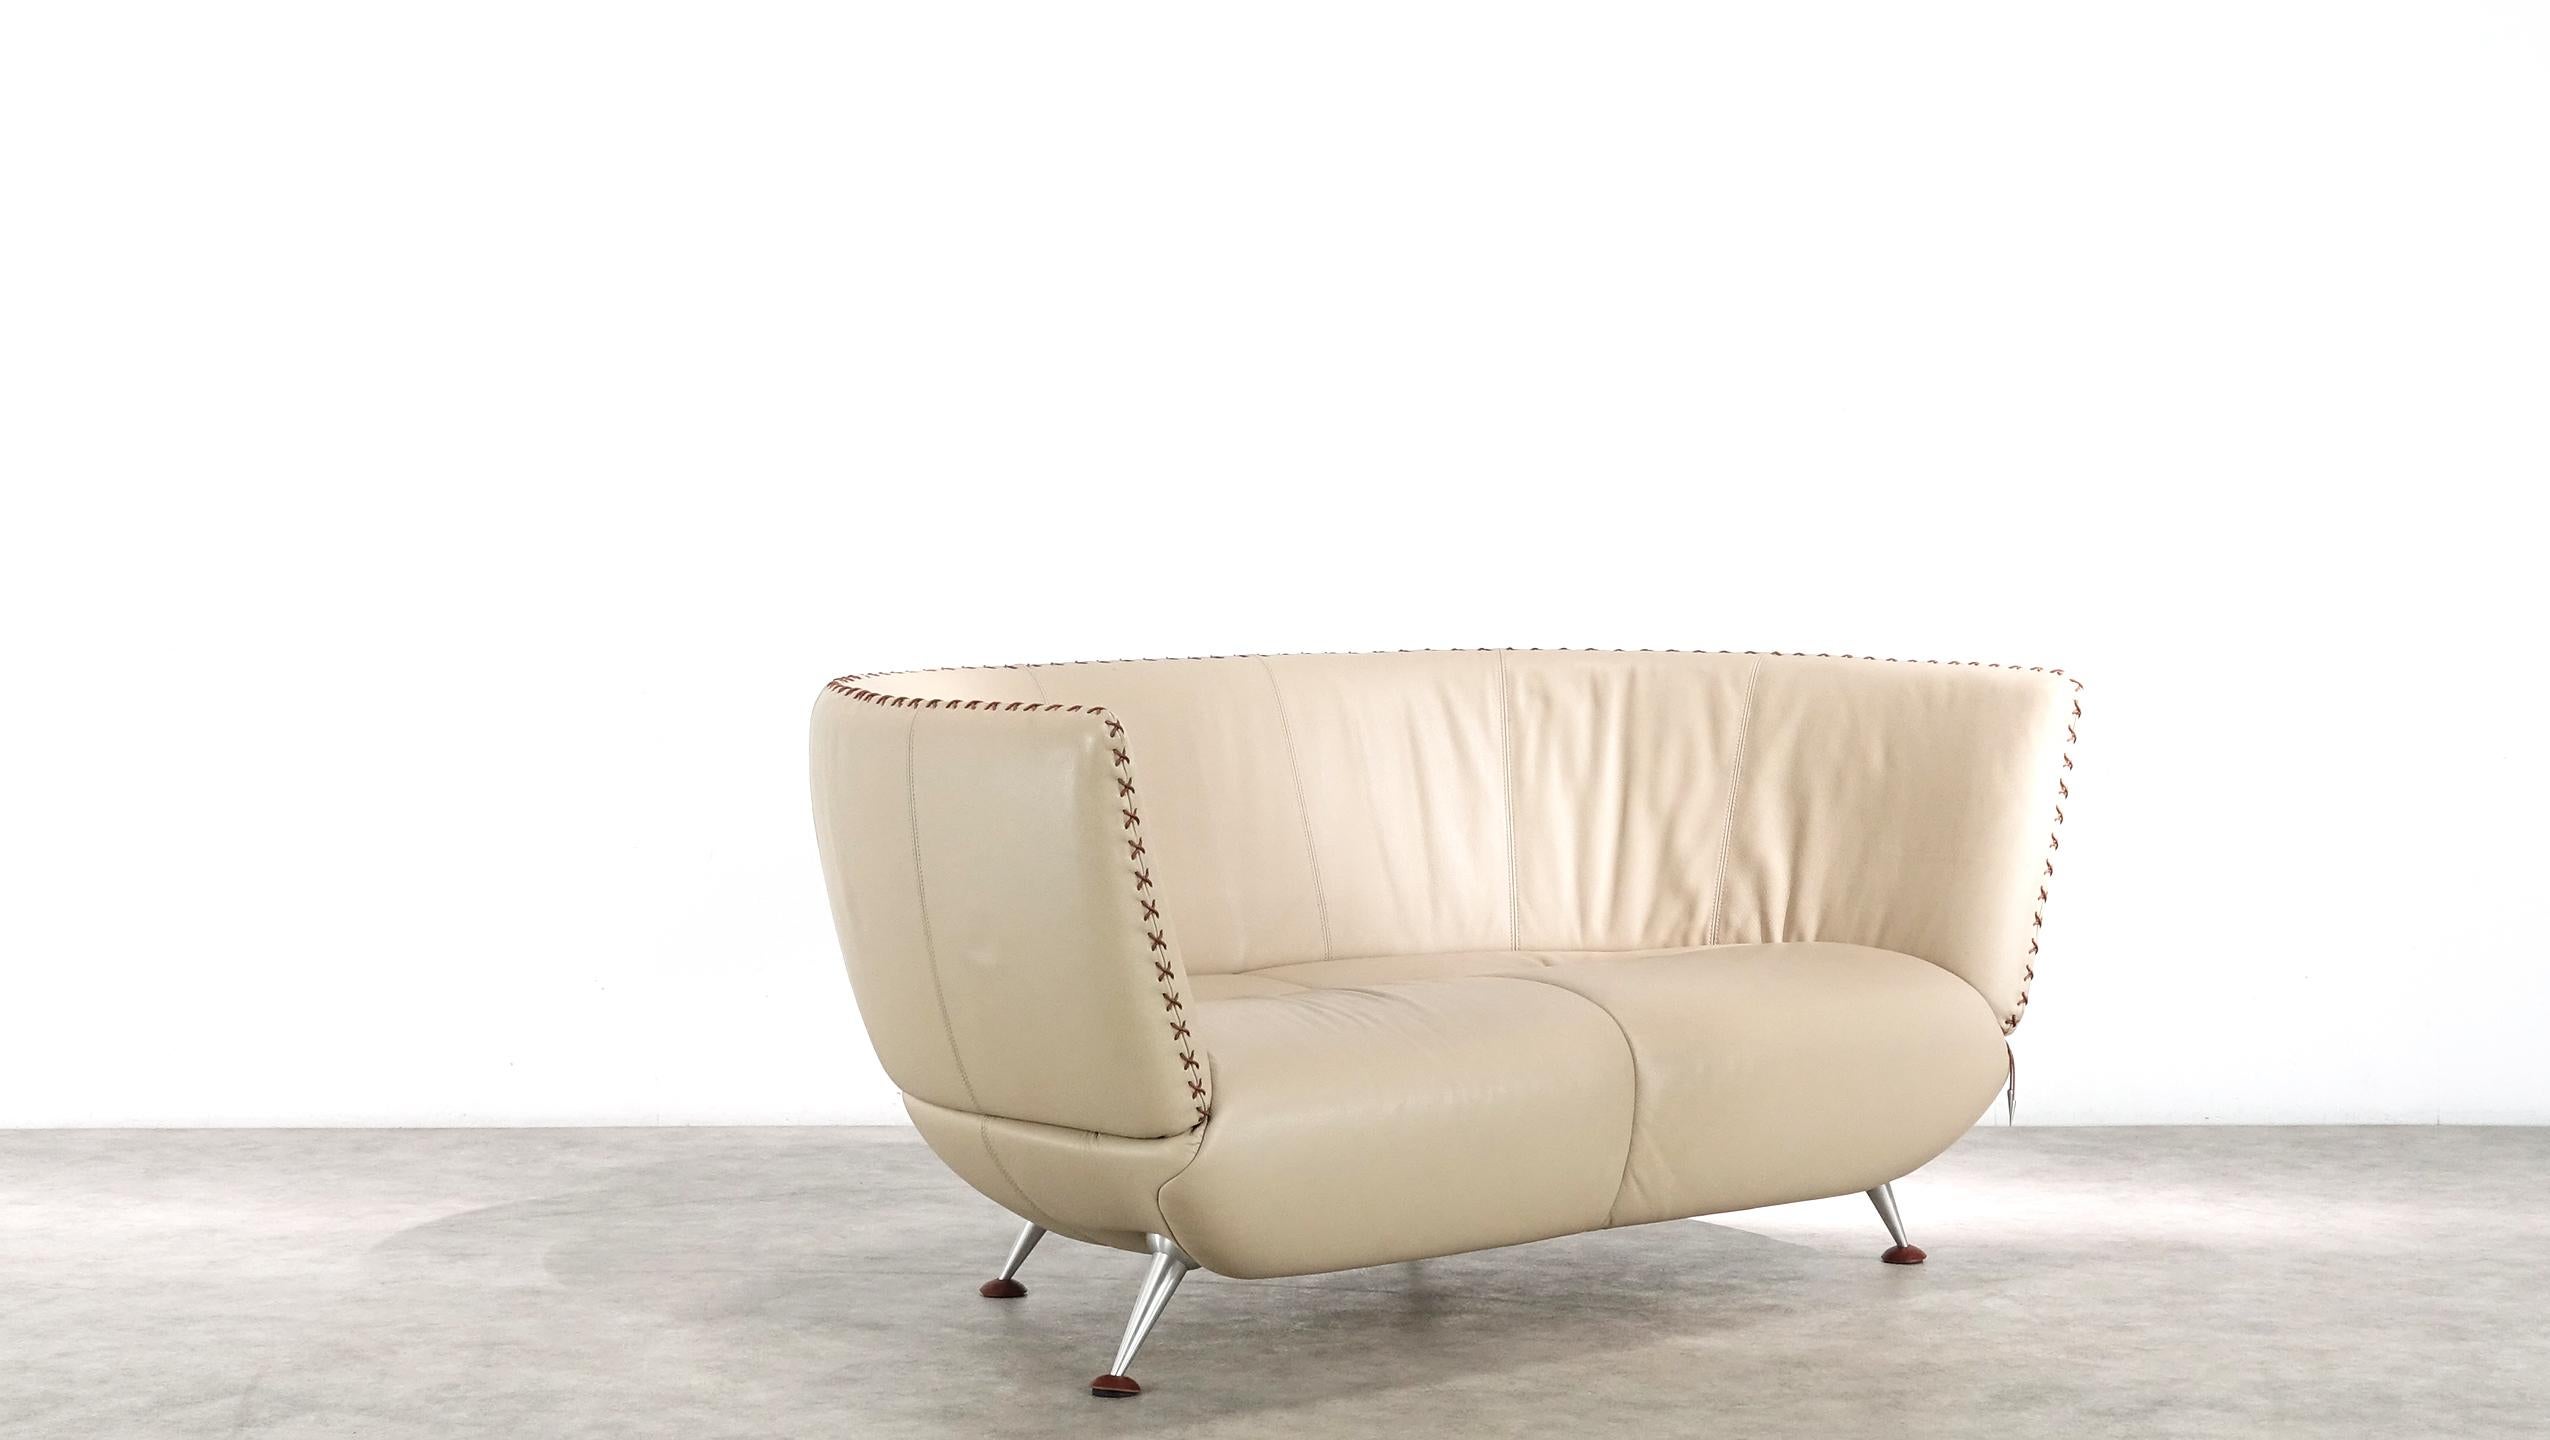 Swiss De Sede Ds 102 Two-Seater Sofa in Sand Upholstery by Mathias Hoffmann